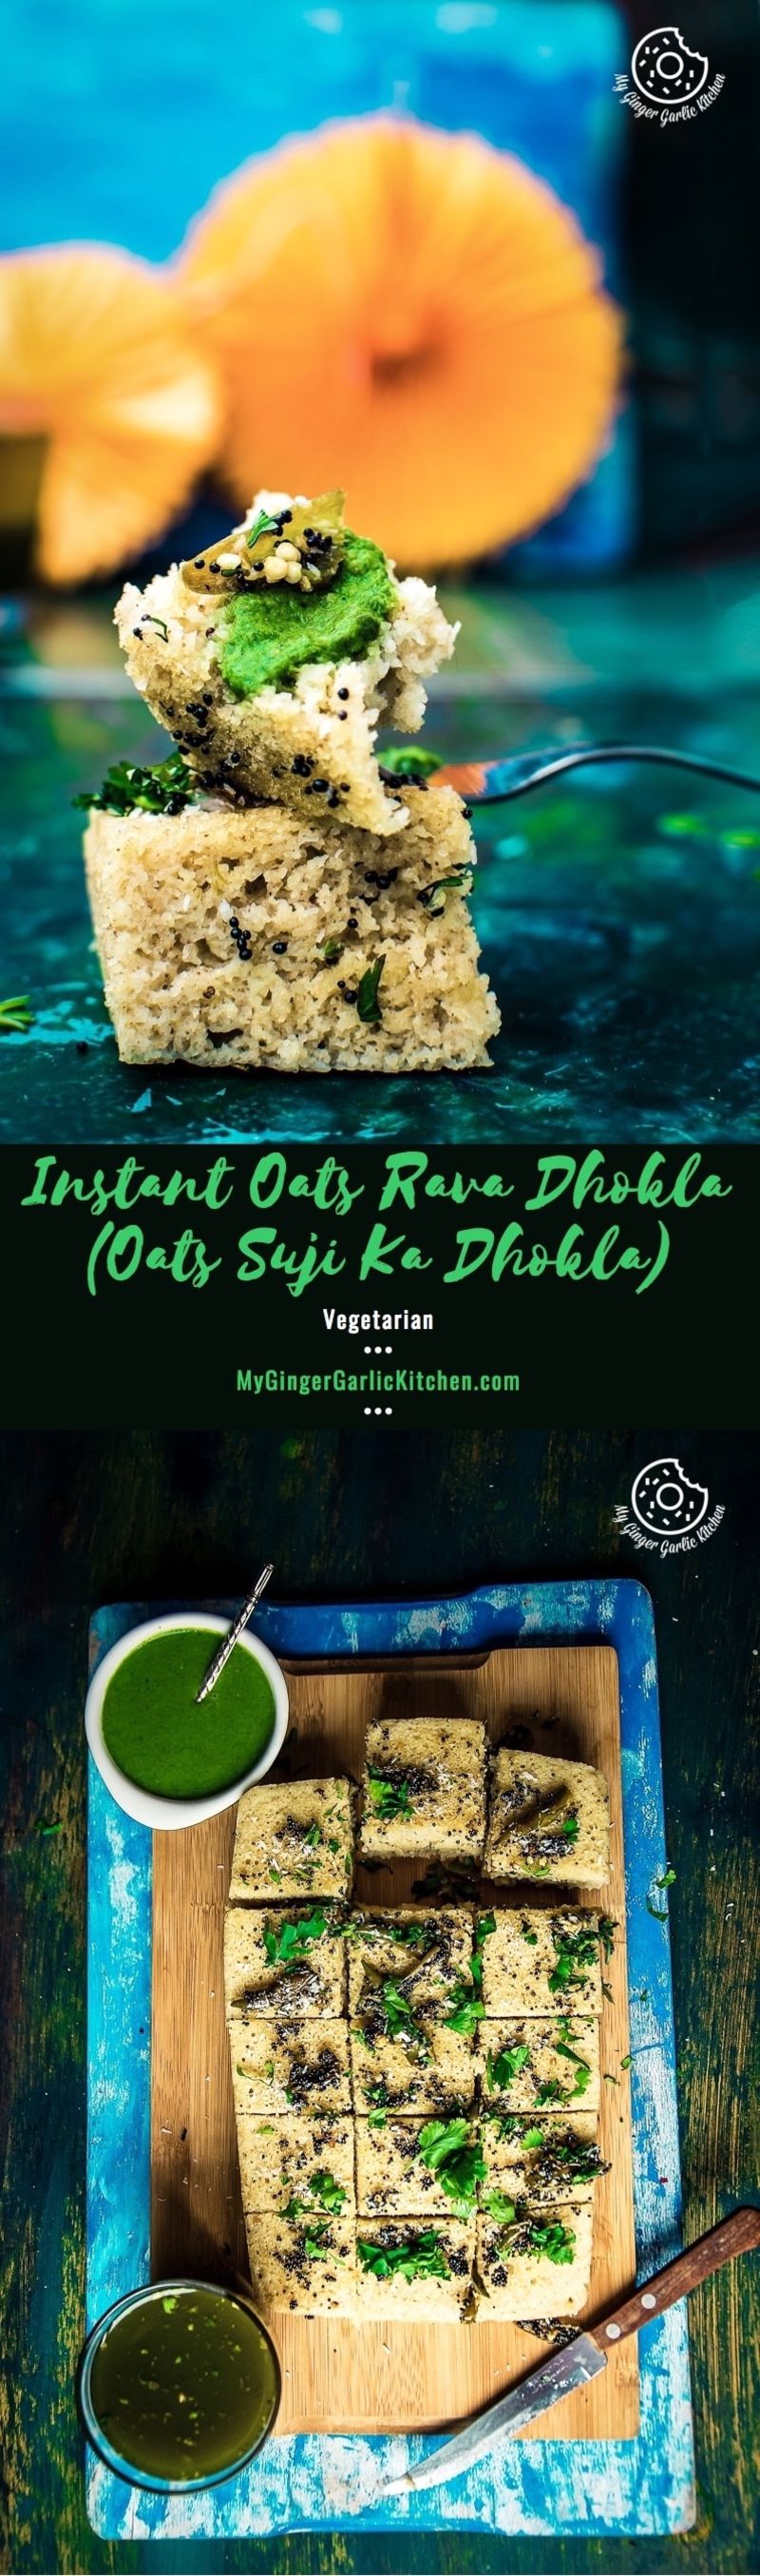 a collage with two images of instant oats rava dhokla